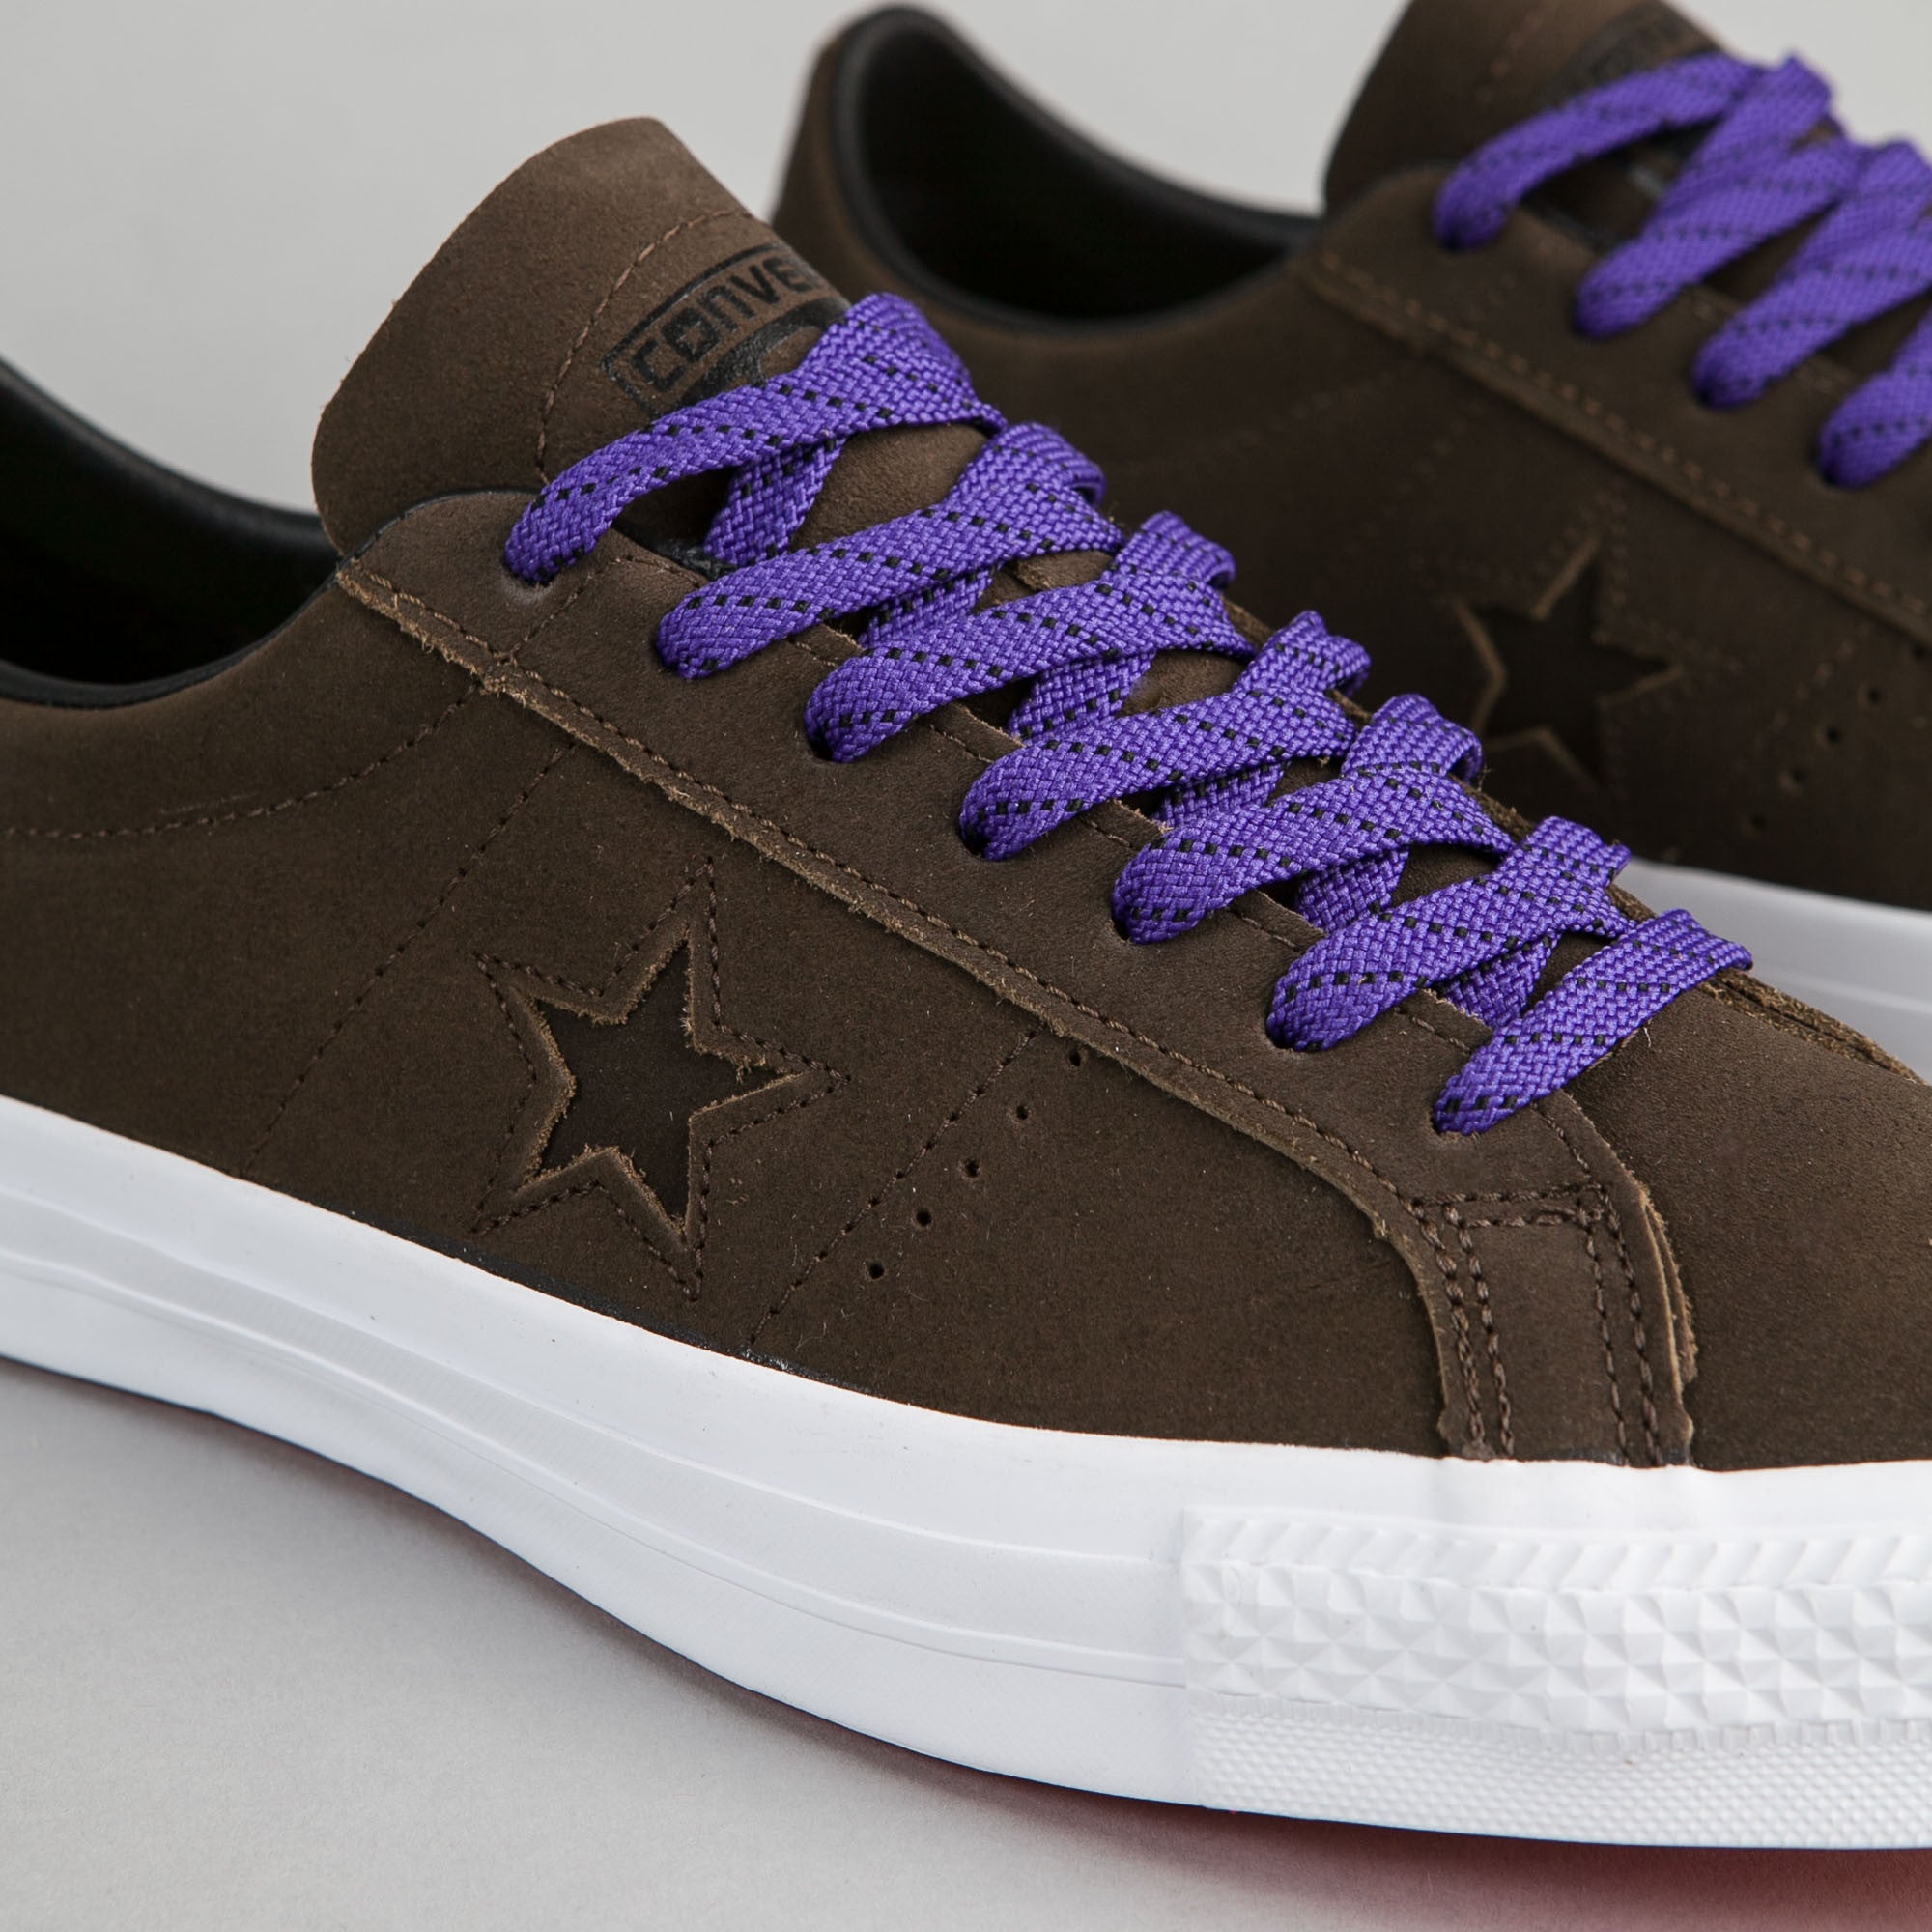 Converse One Star Pro Leather OX Shoes 